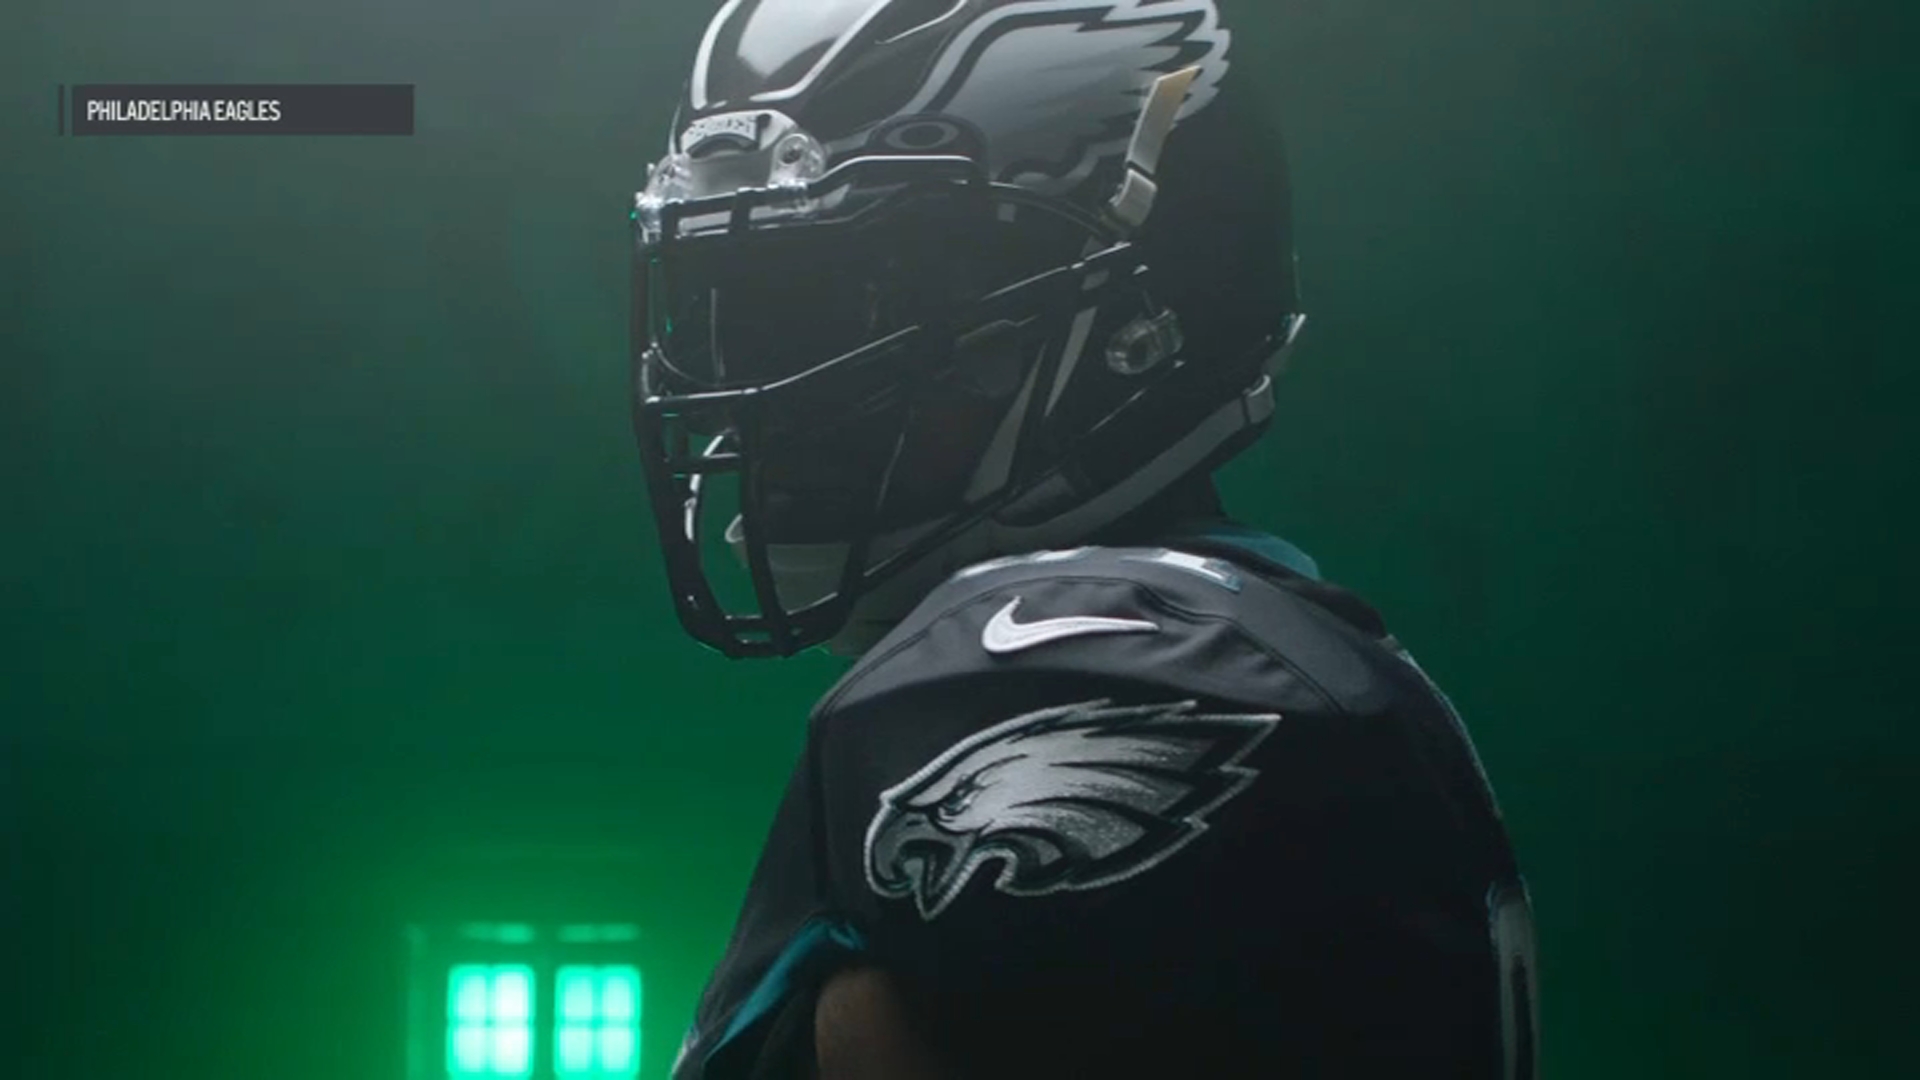 Philadelphia Eagles and all teams should be outlawed from wearing